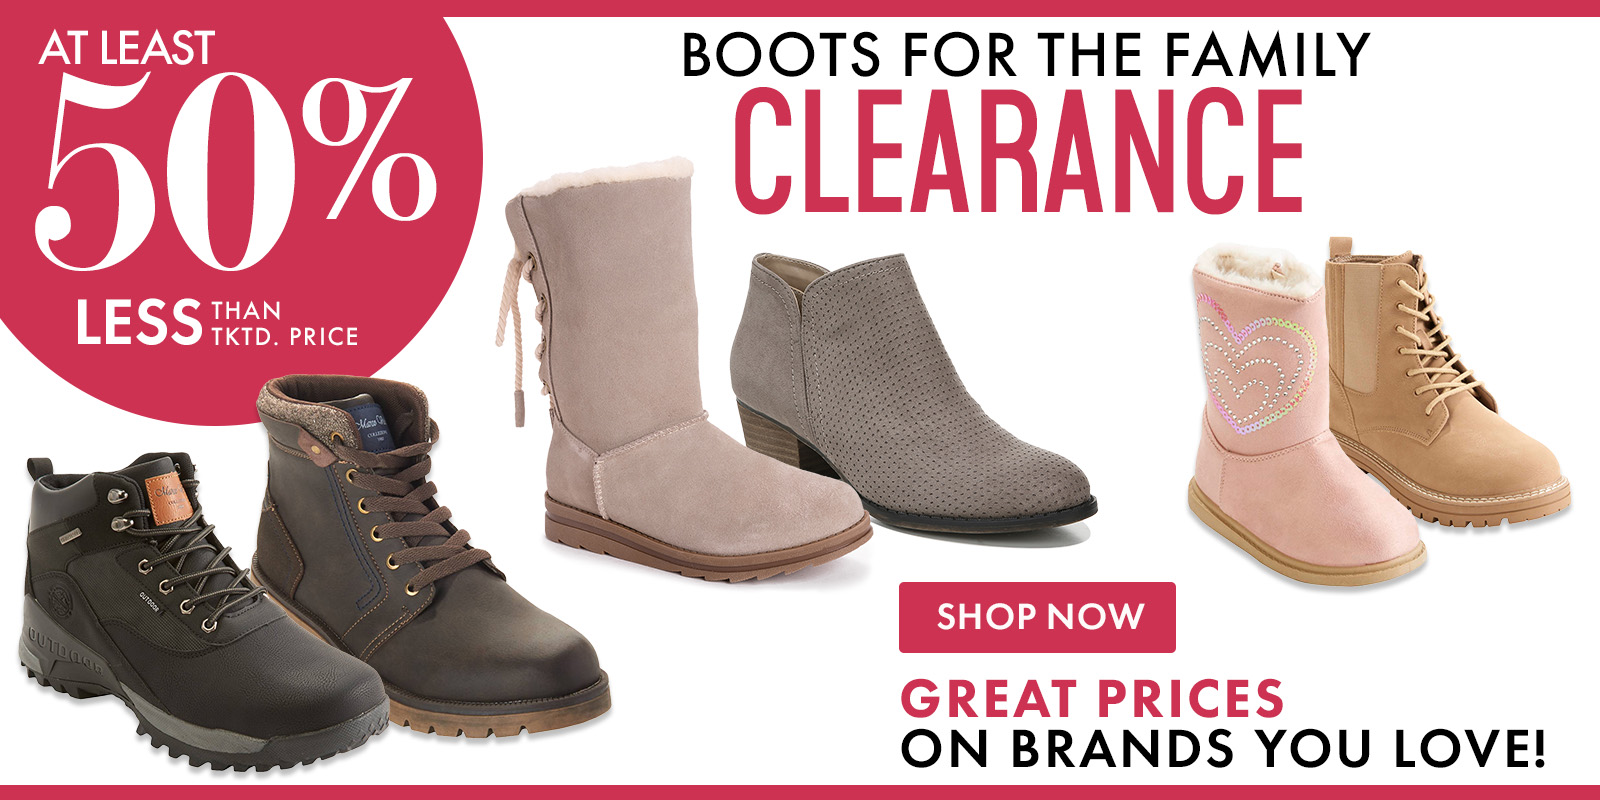 Boots for the Family Clearance